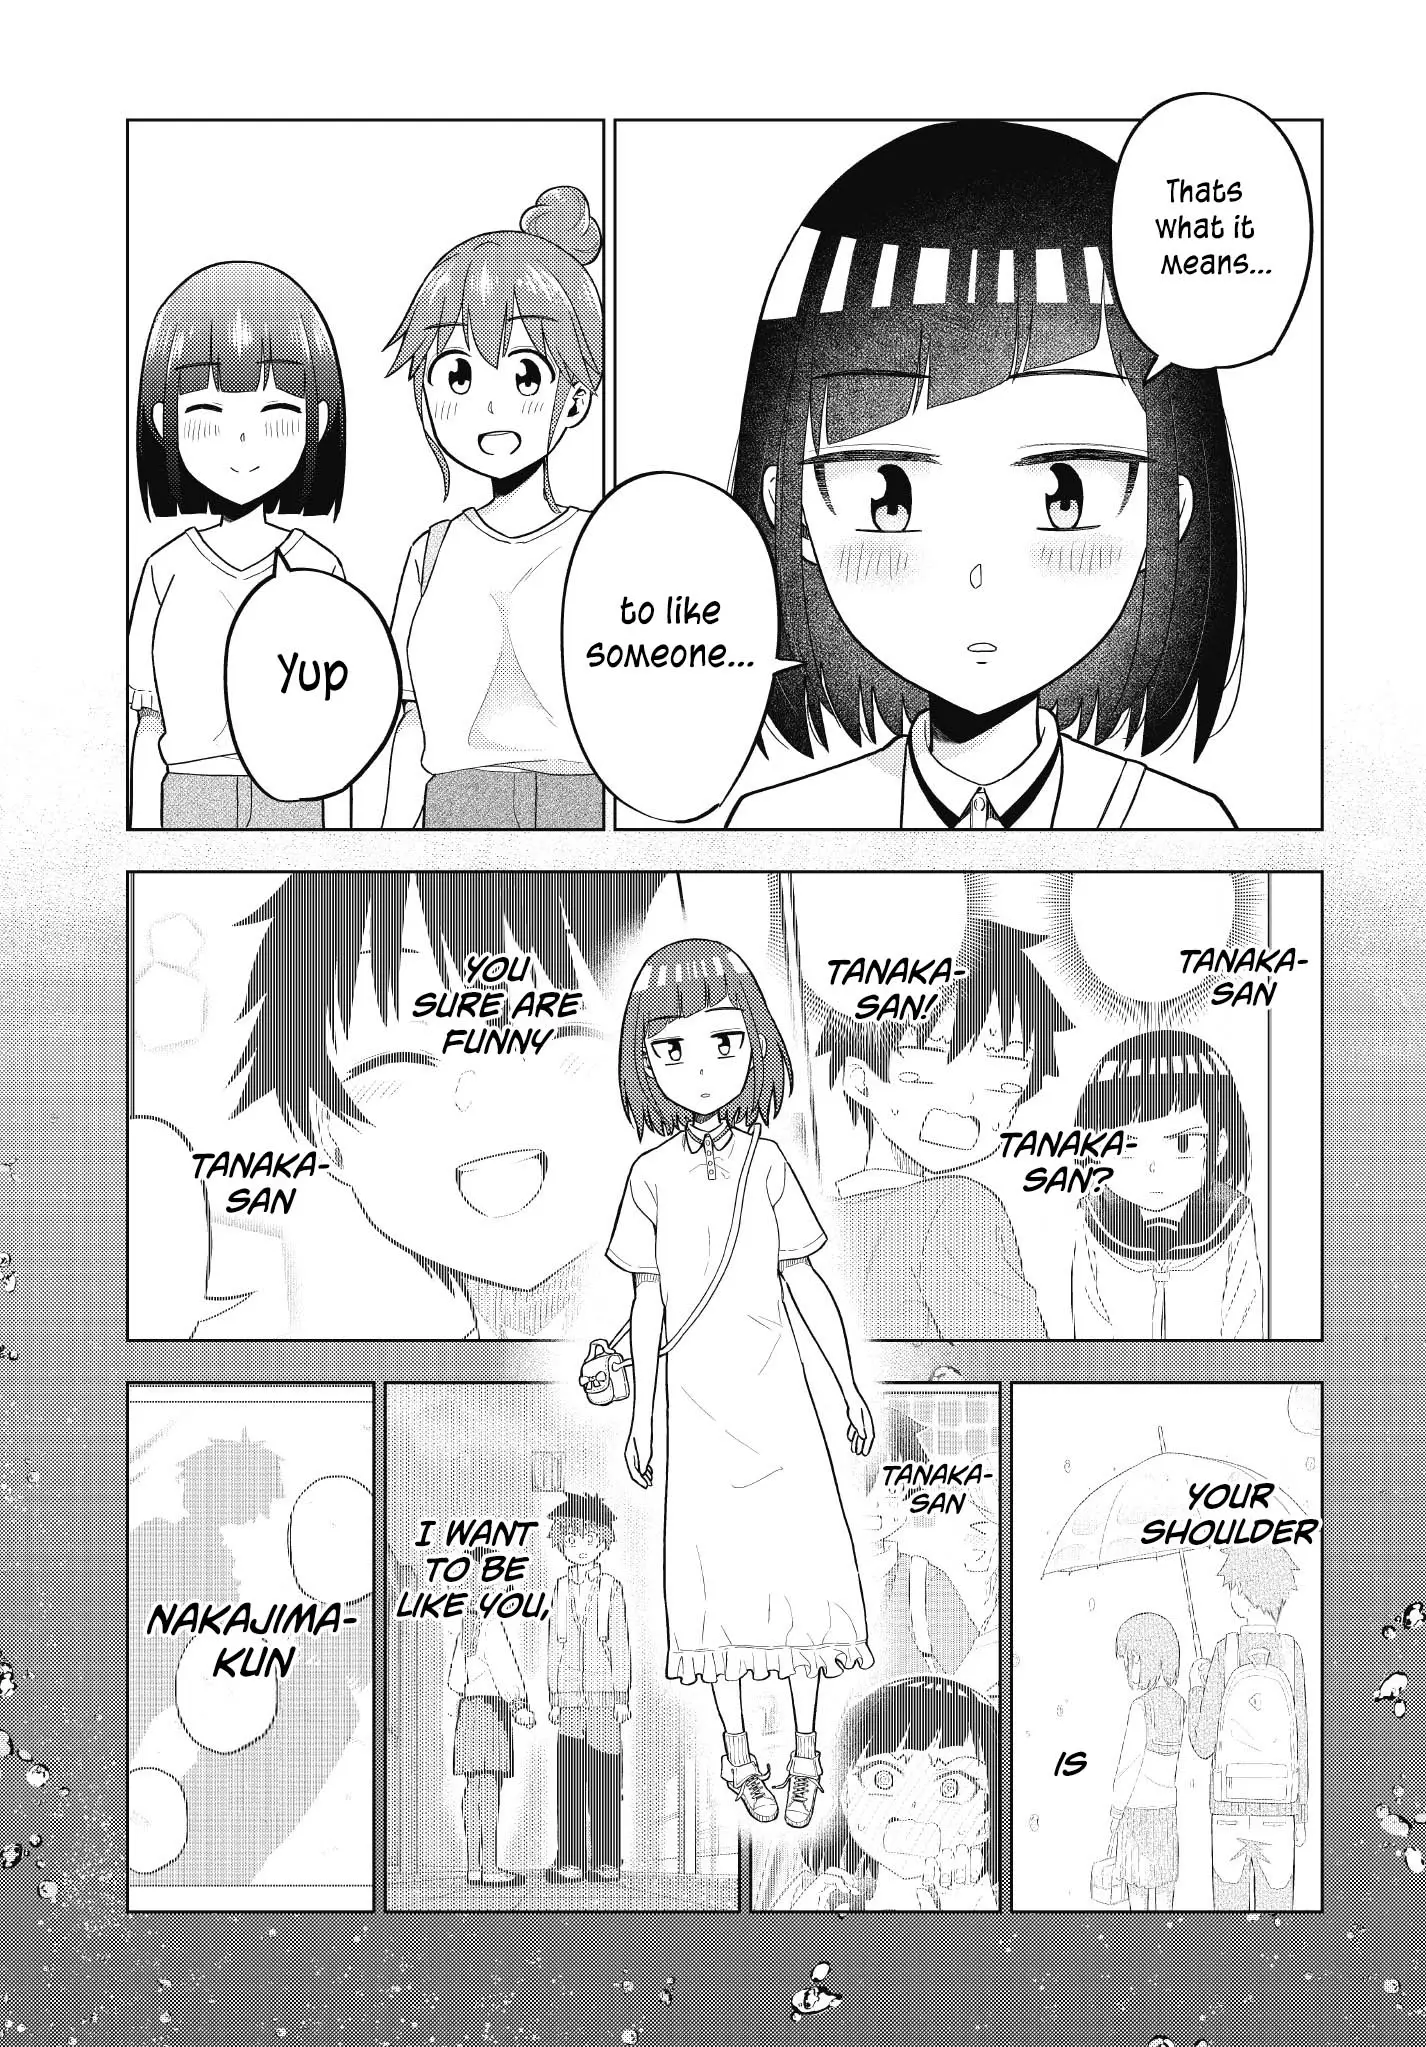 My Classmate Tanaka-San Is Super Scary - 55 page 12